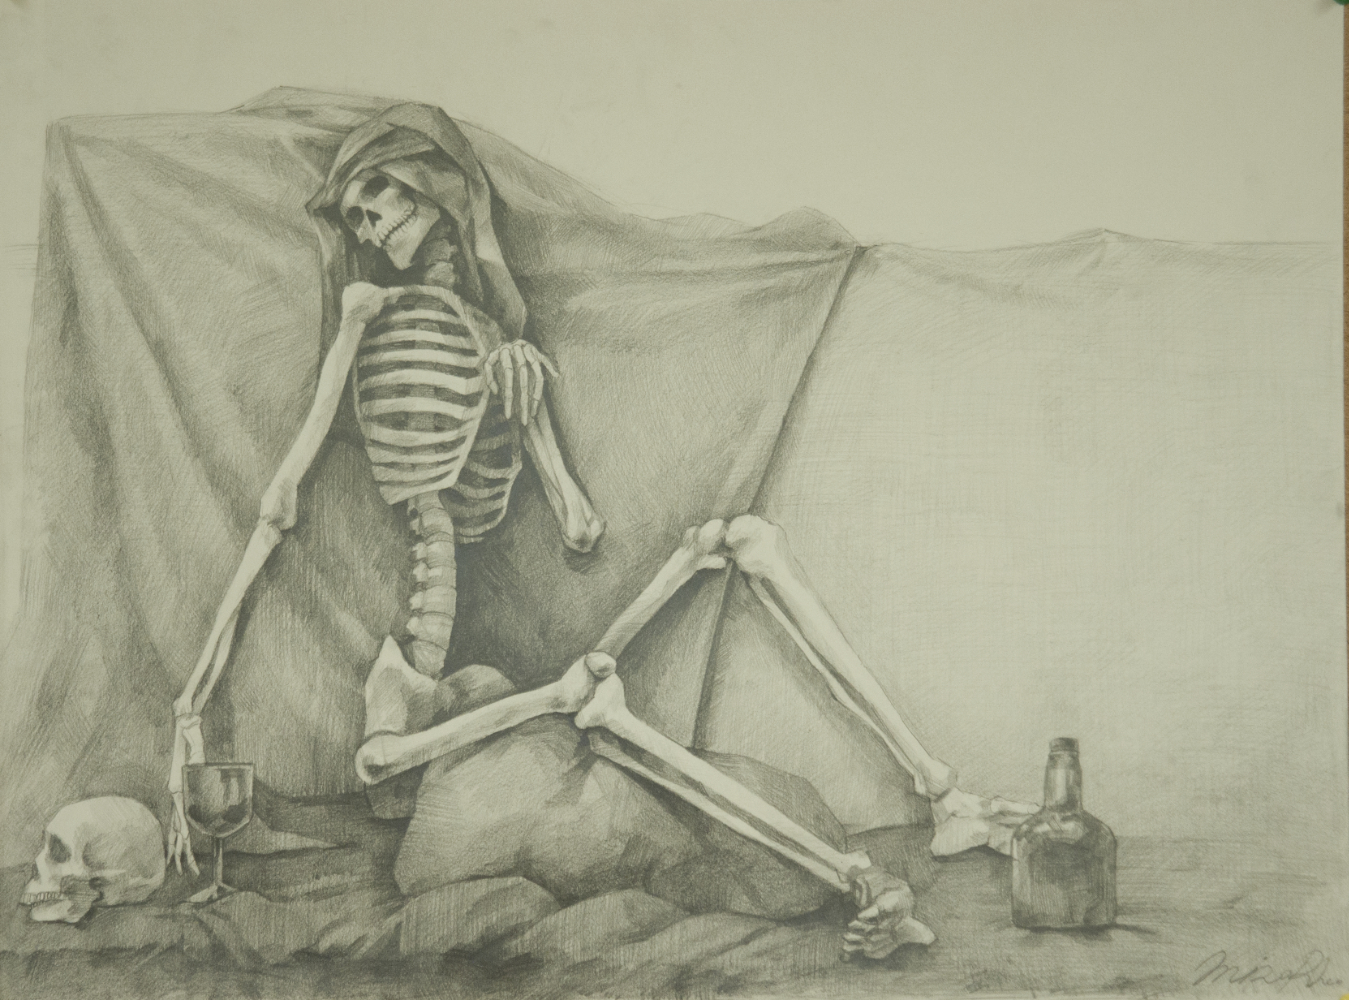 thumbnail of Untitled by Miso Rhee. medium: graphite. date: 2011. dimensions: 18 x 24 inches